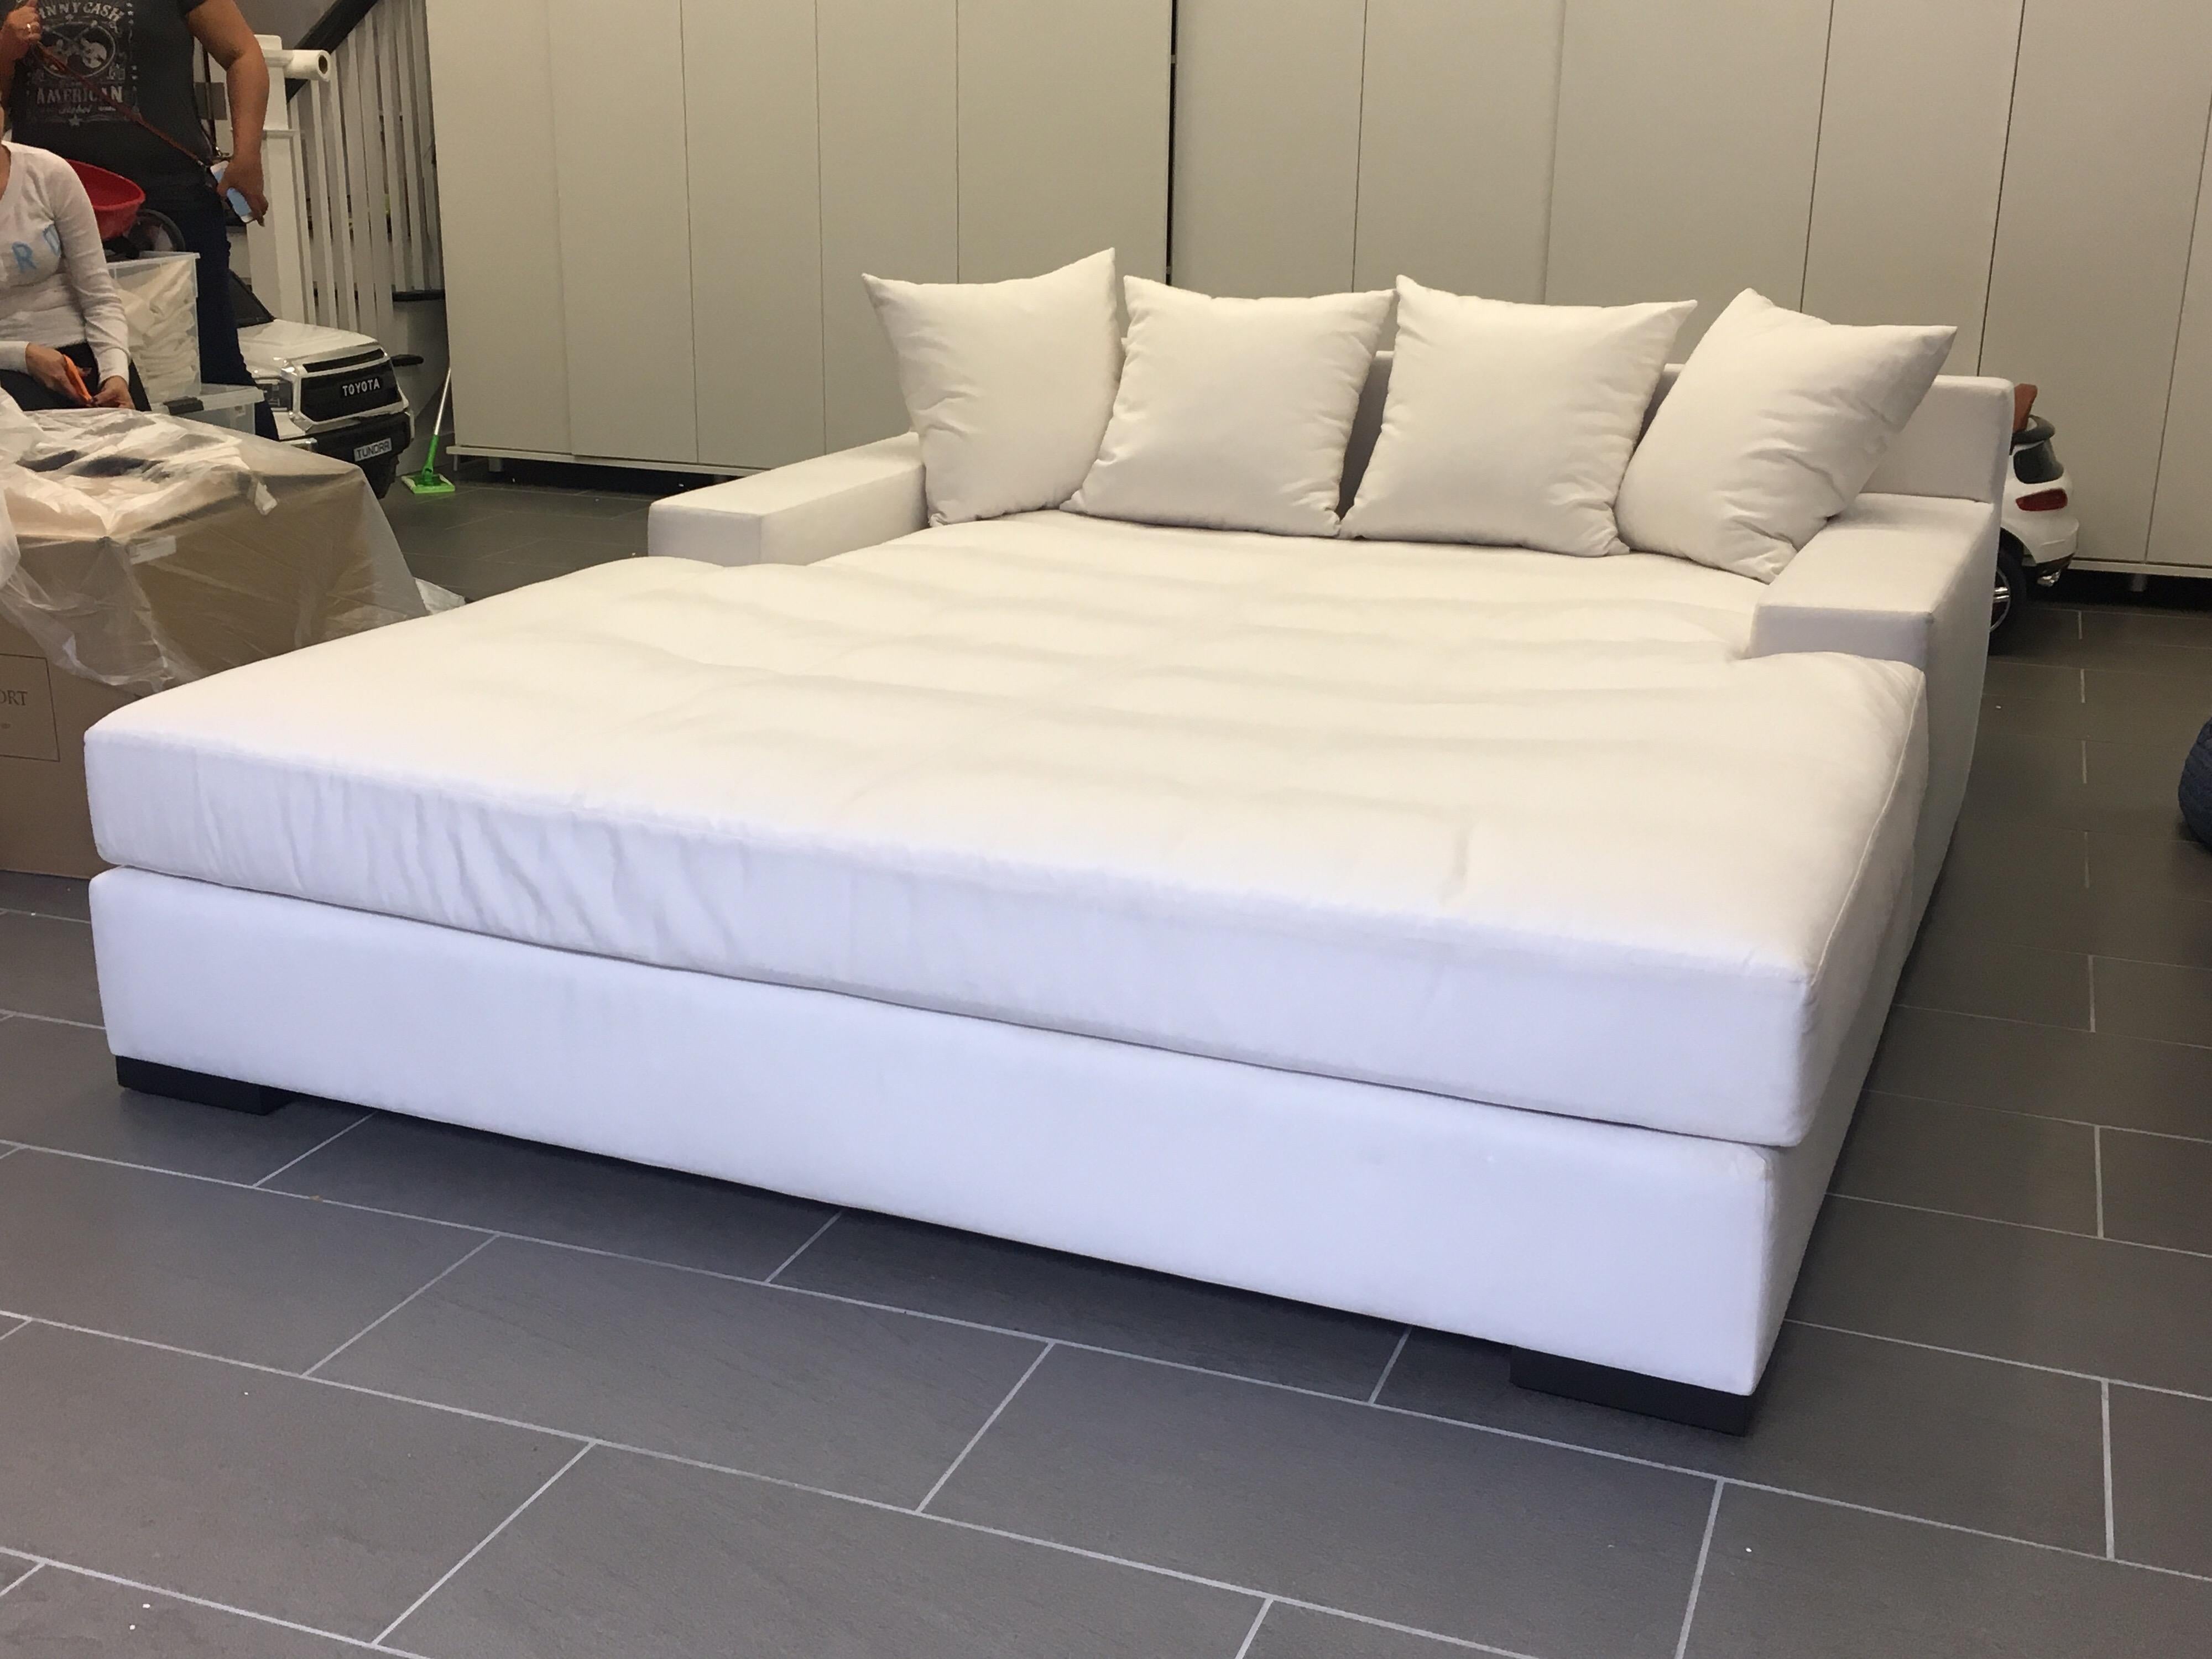 Bayside chaise bed by Sharron Lewis in indoor/outdoor white fabric. This piece was custom made. The fabric is indoor/outdoor but I would suggest indoor or covered outdoor use. Four knife edge pillows 18